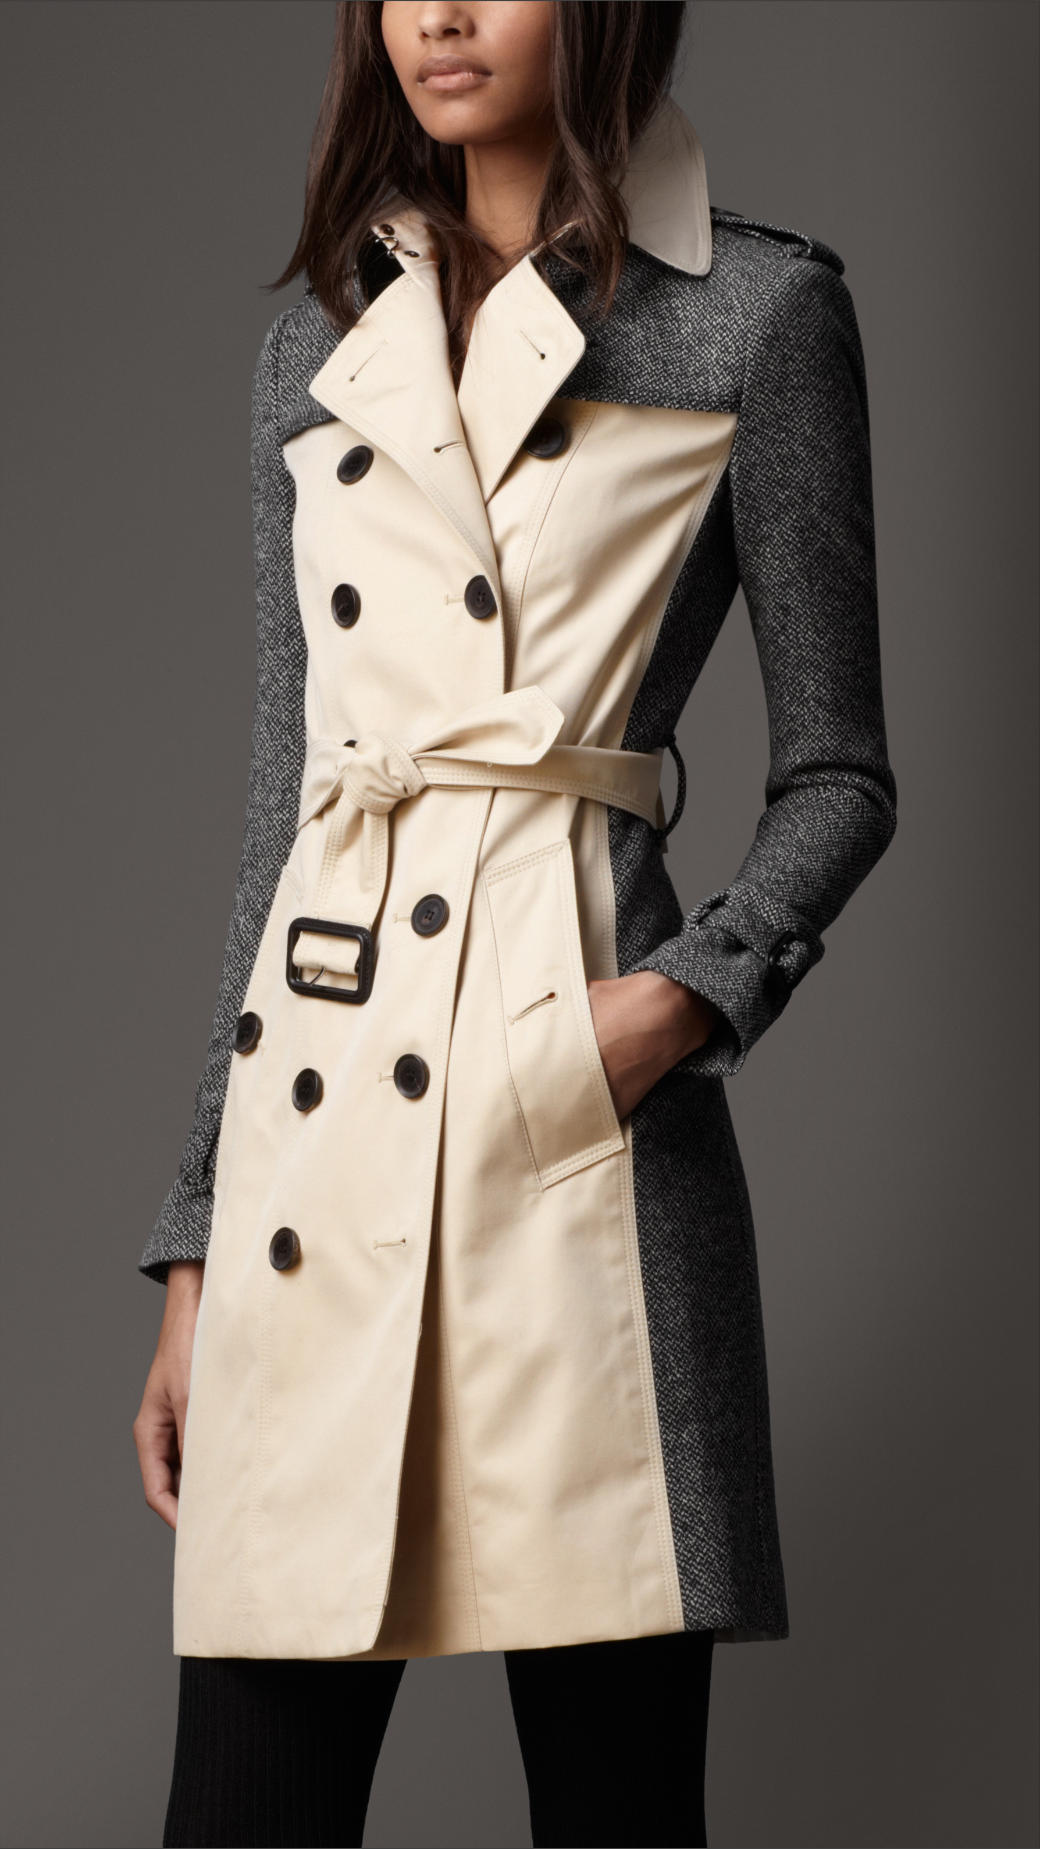 Lyst - Burberry Long Tweed Panel Trench Coat in Gray